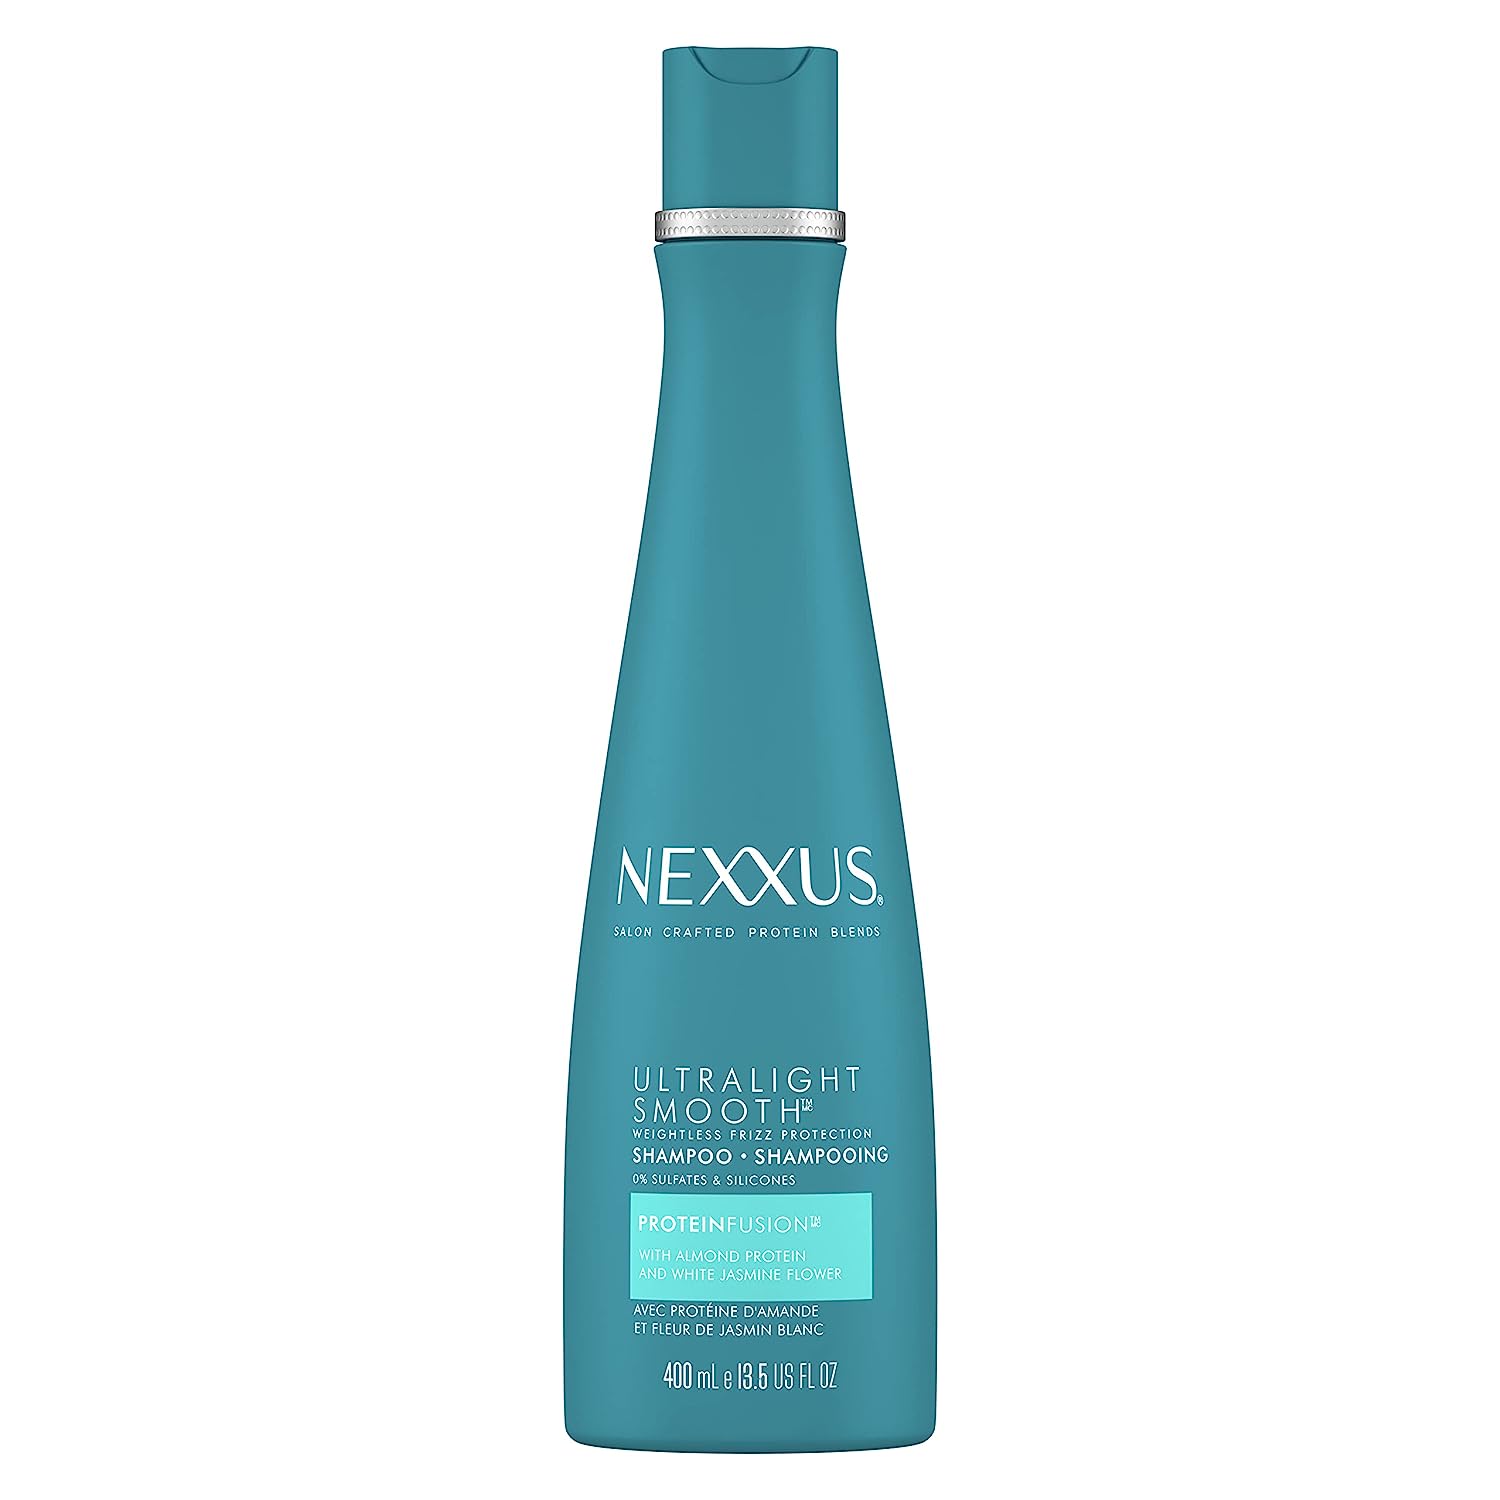 Nexxus Ultralight Smooth Shampoo for Dry and Frizzy [...]